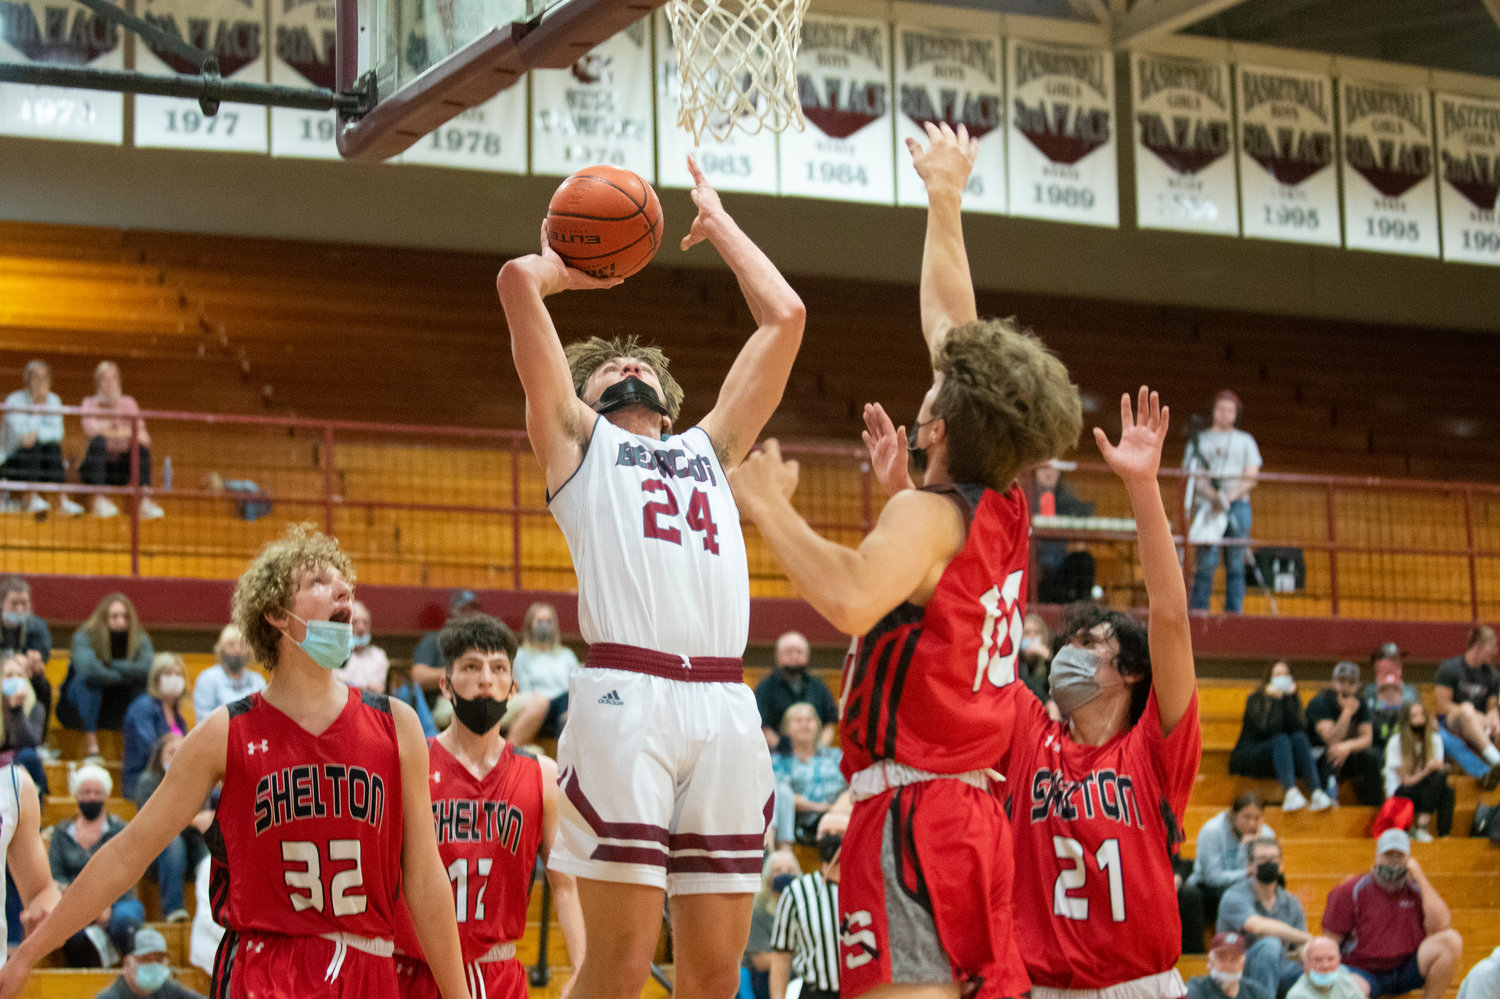 W.F. West senior Carter McCoy puts up a shot in the paint against Shelton on Tuesday.